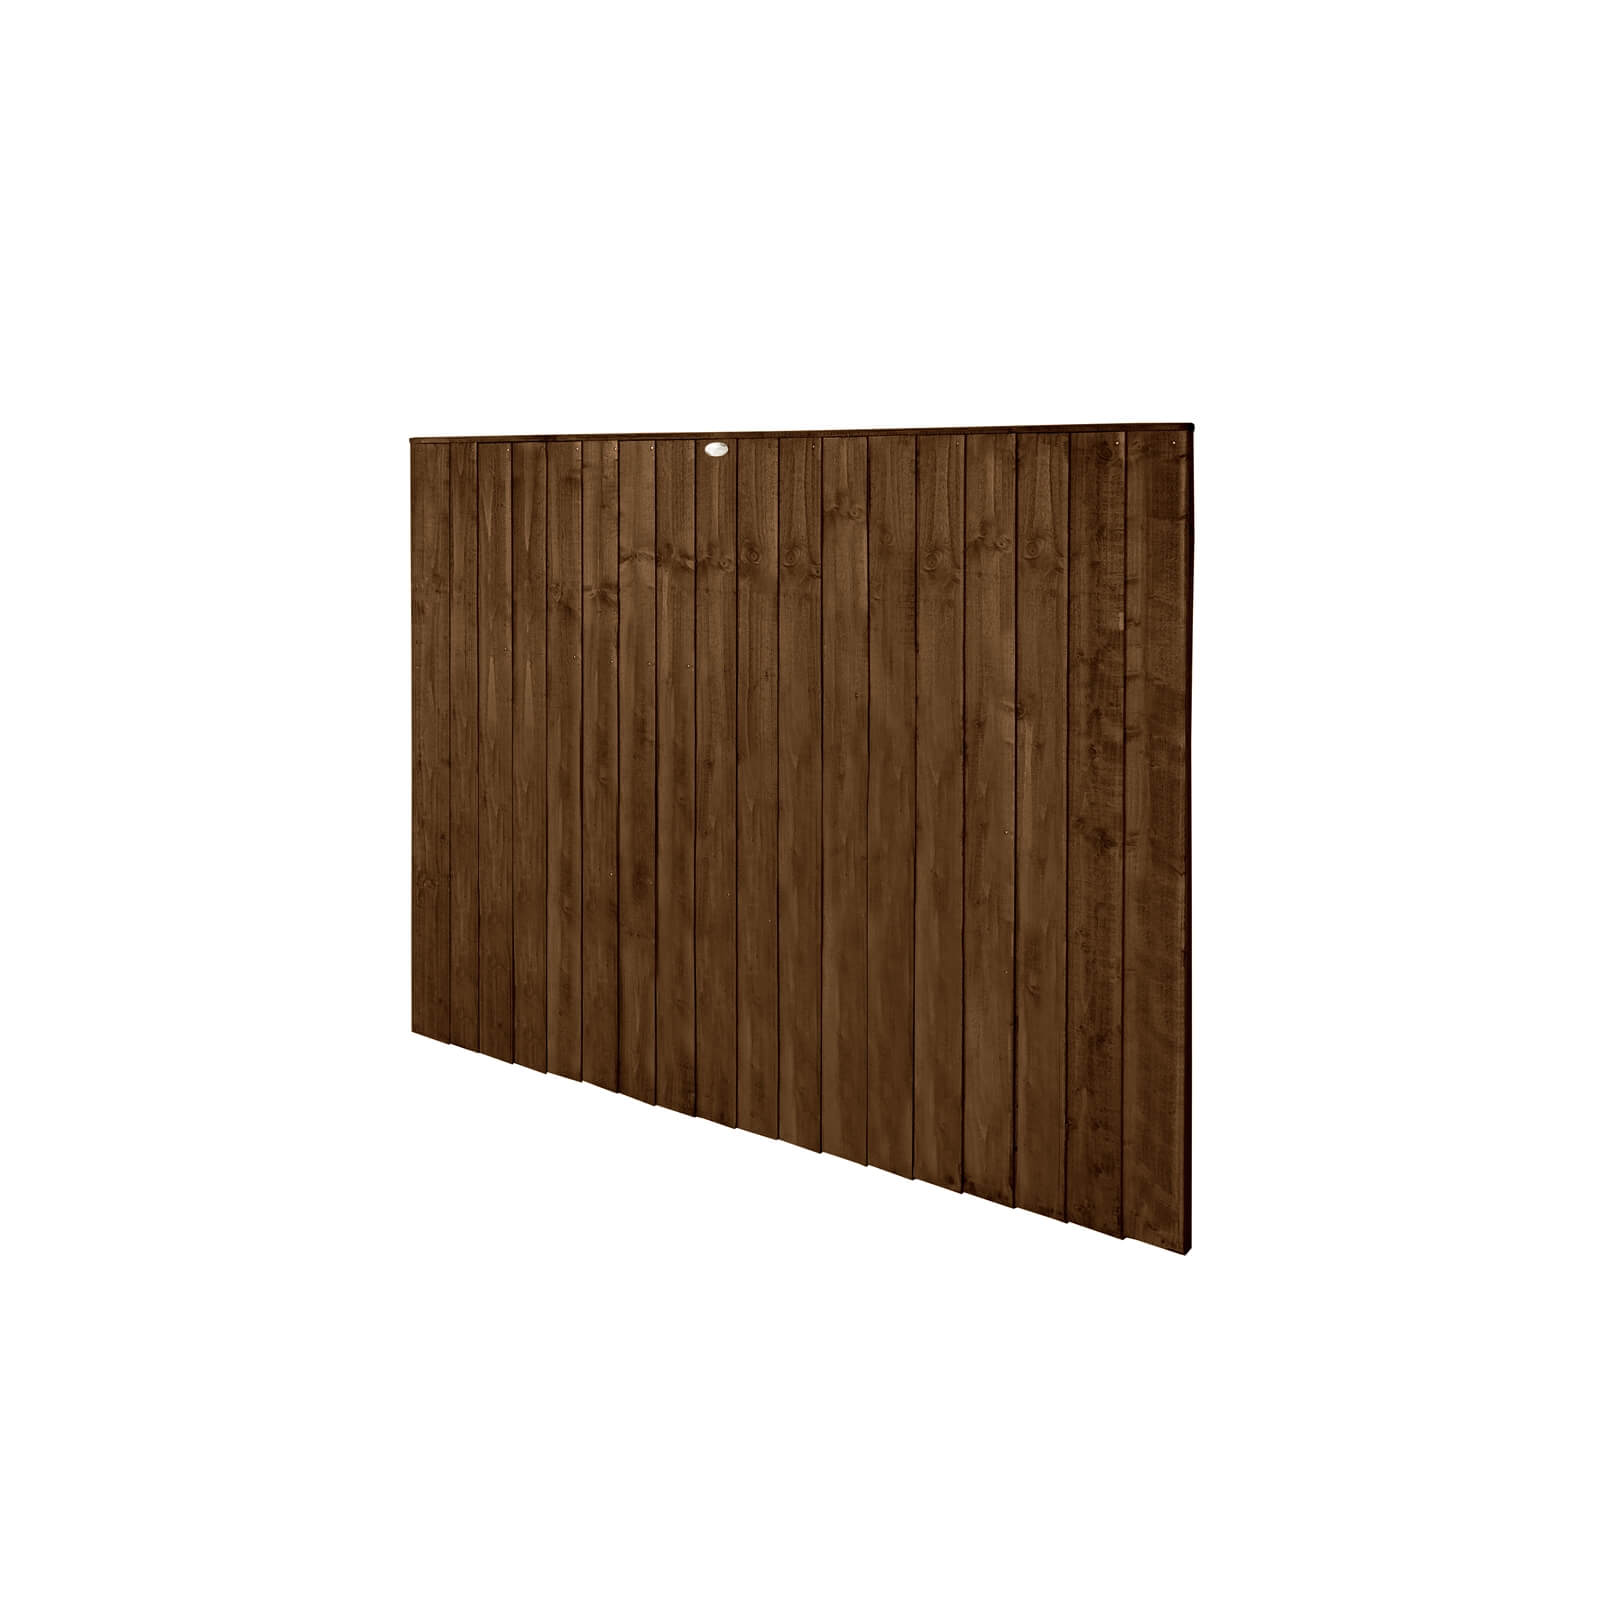 6ft x 5ft (1.83m x 1.54m) Pressure Treated Featheredge Fence Panel (Dark Brown) - Pack of 3